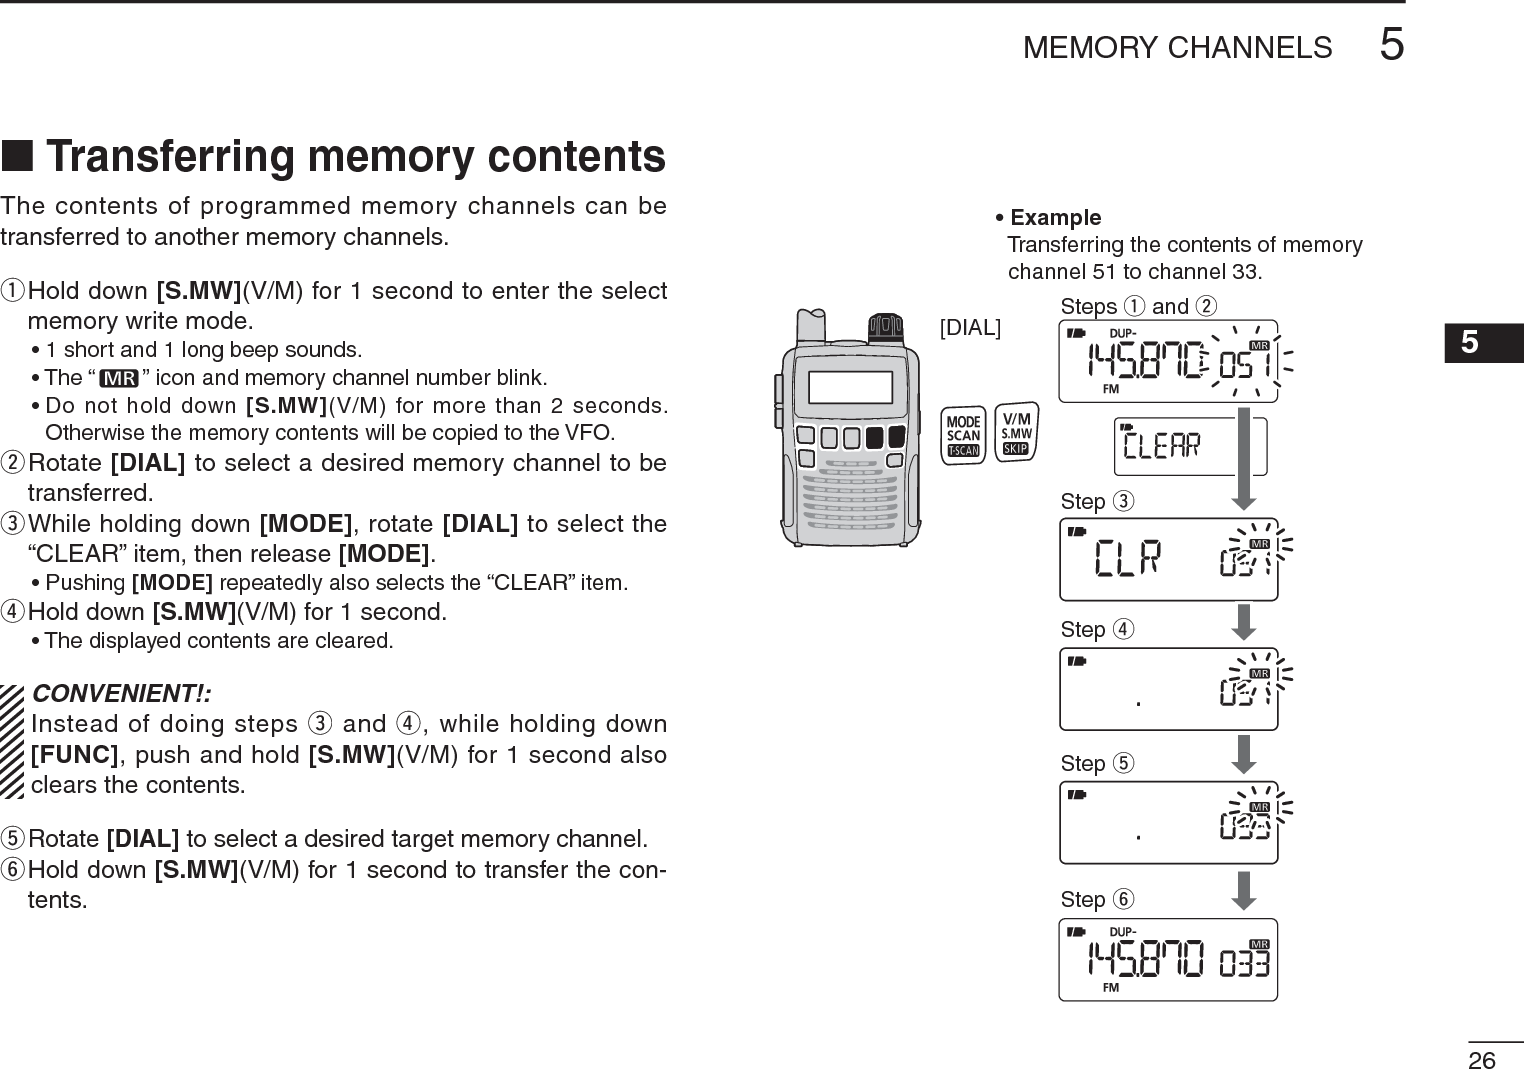 265MEMORY CHANNELS5NTransferring memory contentsThe contents of programmed memory channels can be transferred to another memory channels. q  Hold down [S.MW](V/M) for 1 second to enter the select memory write mode.• 1 short and 1 long beep sounds.• The “ ” icon and memory channel number blink.• Do not hold down [S.MW](V/M) for more than 2 seconds. Otherwise the memory contents will be copied to the VFO.w  Rotate [DIAL] to select a desired memory channel to be transferred.e  While holding down [MODE], rotate [DIAL] to select the “CLEAR” item, then release [MODE].• Pushing [MODE] repeatedly also selects the “CLEAR” item.rHold down [S.MW](V/M) for 1 second. • The displayed contents are cleared.CONVENIENT!:Instead of doing steps e and r, while holding down [FUNC], push and hold [S.MW](V/M) for 1 second also clears the contents.tRotate [DIAL] to select a desired target memory channel.y  Hold down [S.MW](V/M) for 1 second to transfer the con-tents.[DIAL]• ExampleTransferring the contents of memory  channel 51 to channel 33.Steps q and wStep eStep rStep tStep y